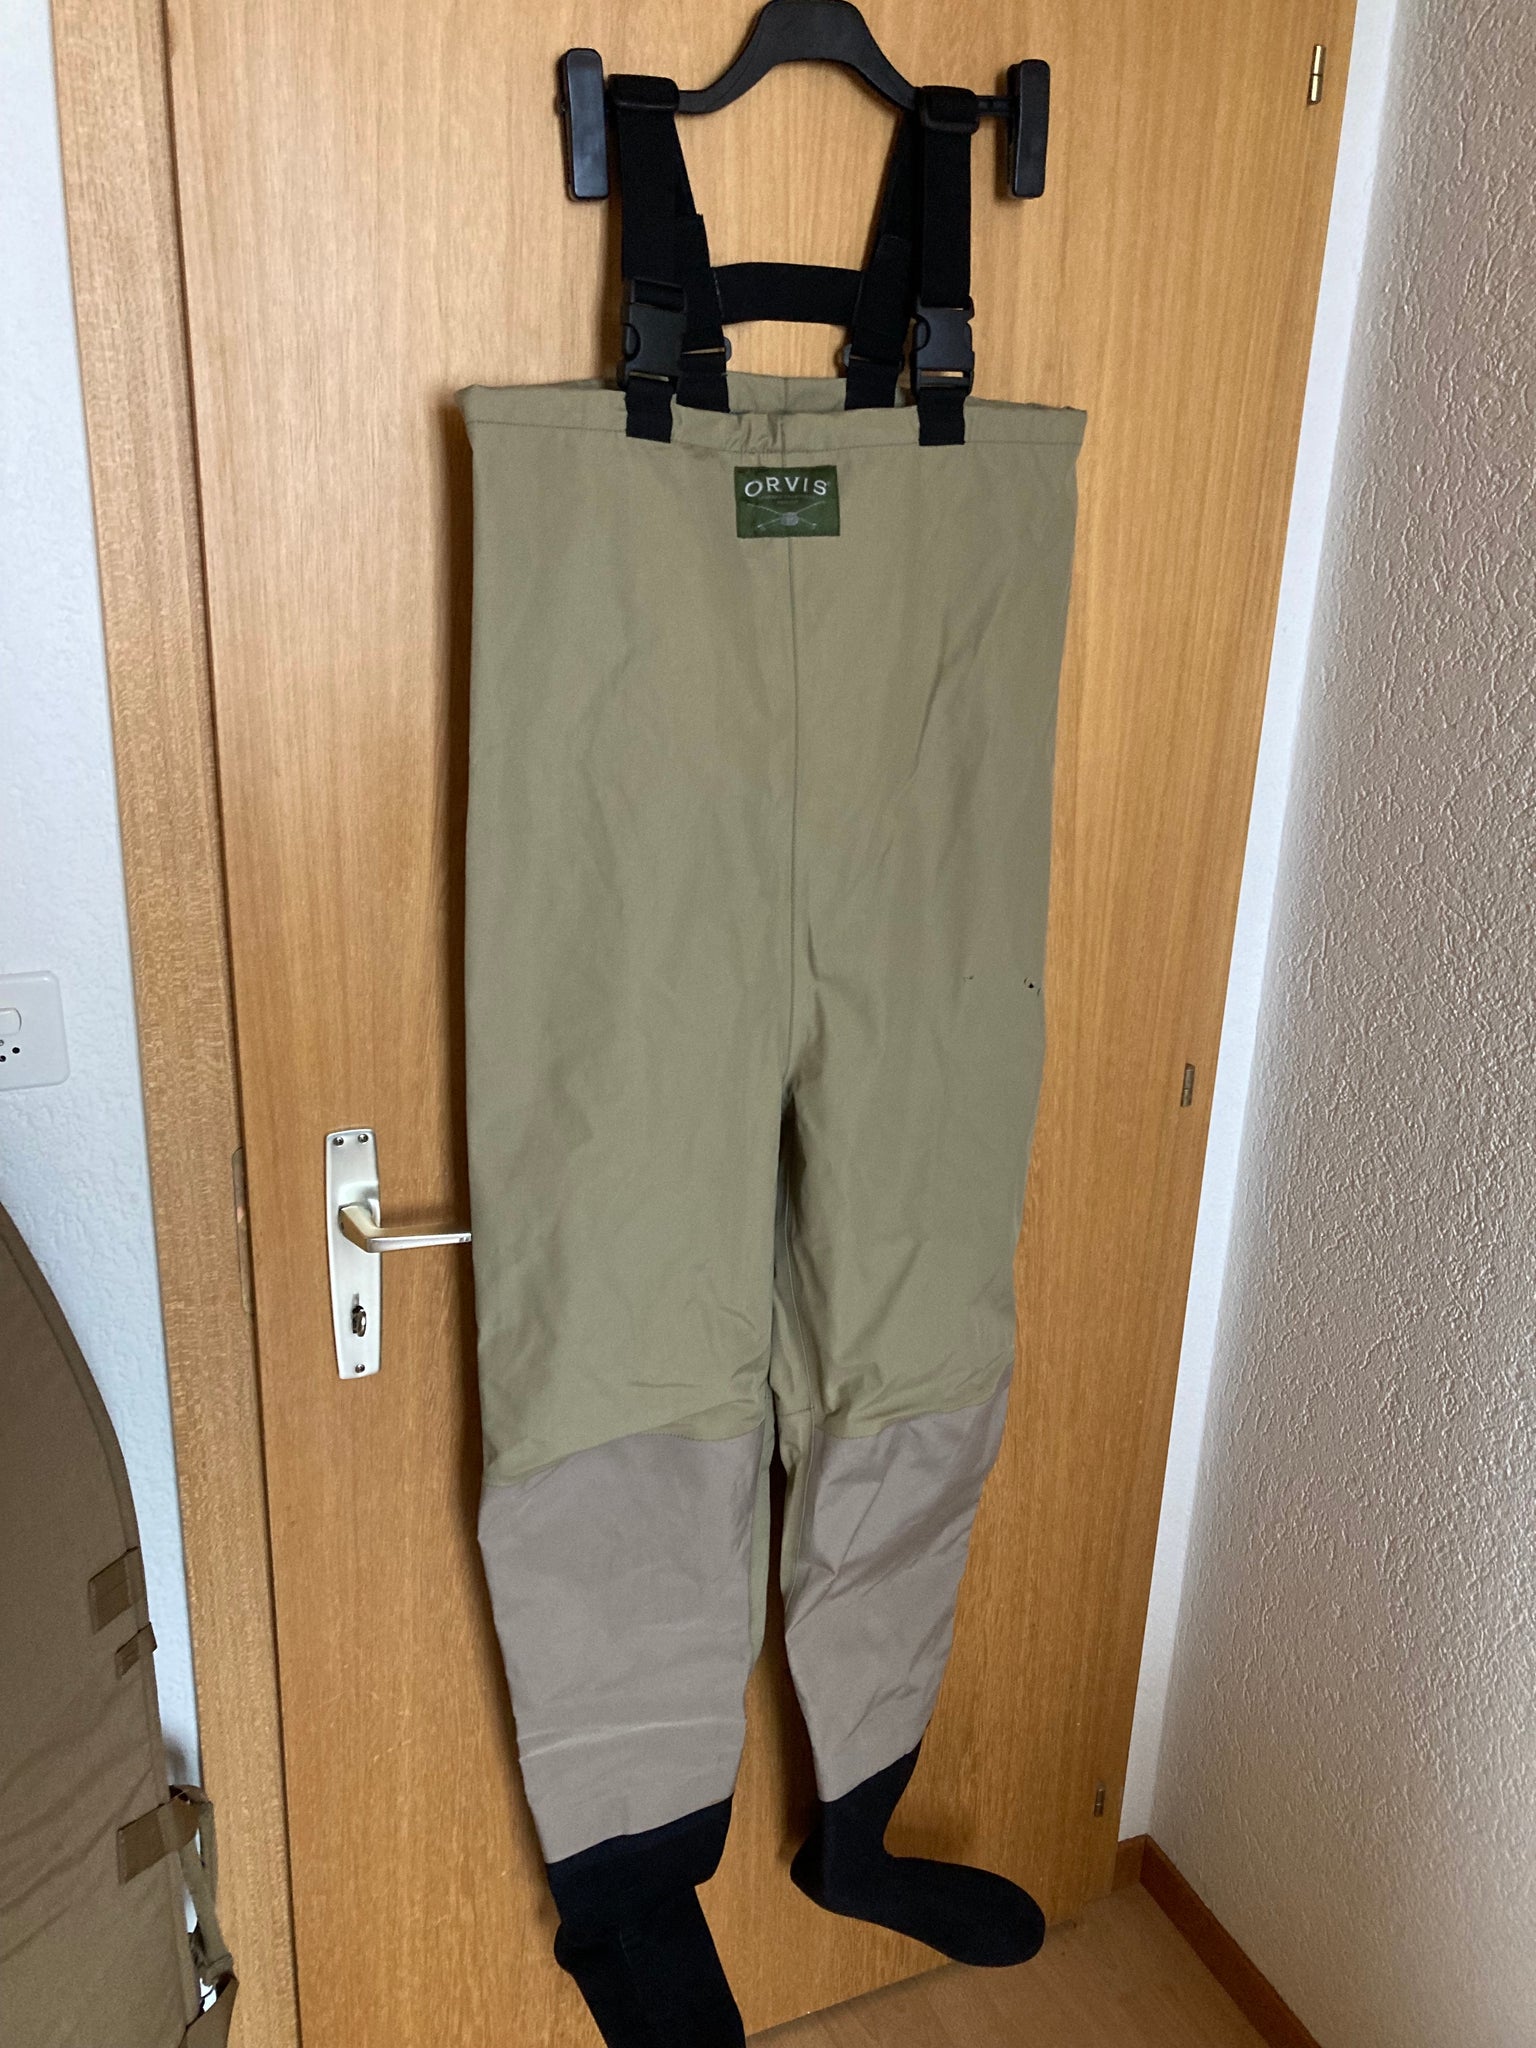 Pants, Orvis Fly Fishing Waders Size Small